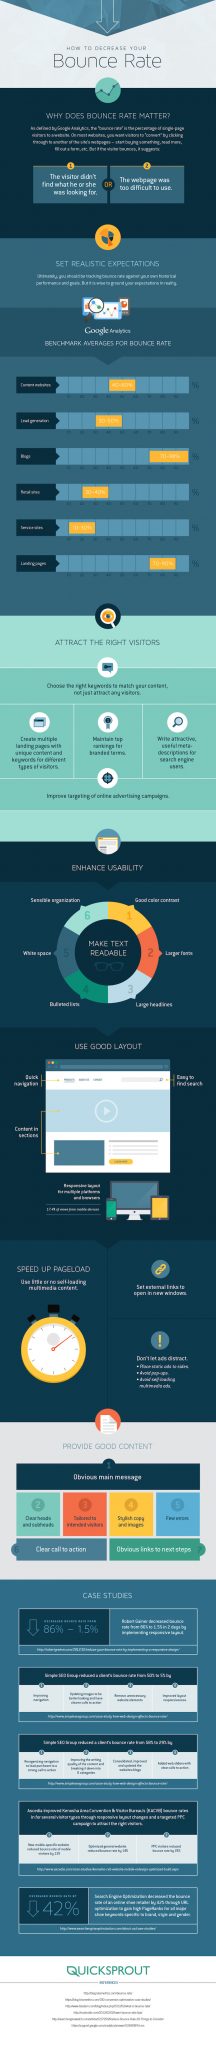 an infographic over bounce rate elements and tips on how to decrease bounce rate